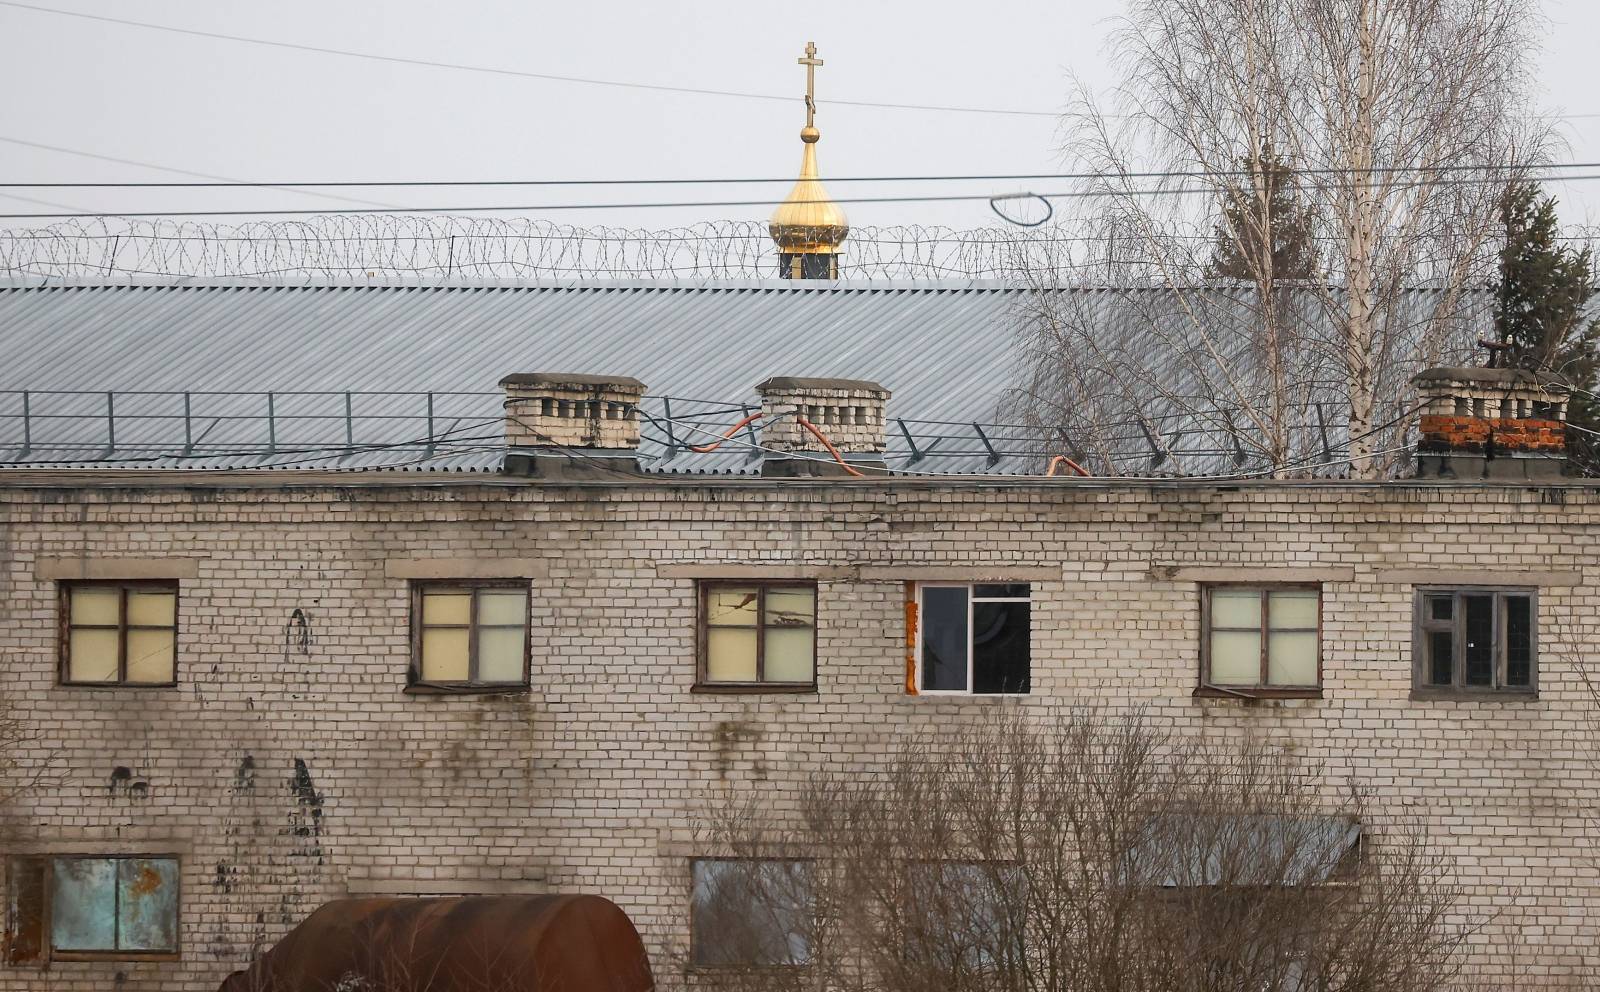 A view shows the IK-2 corrective penal colony in Pokrov